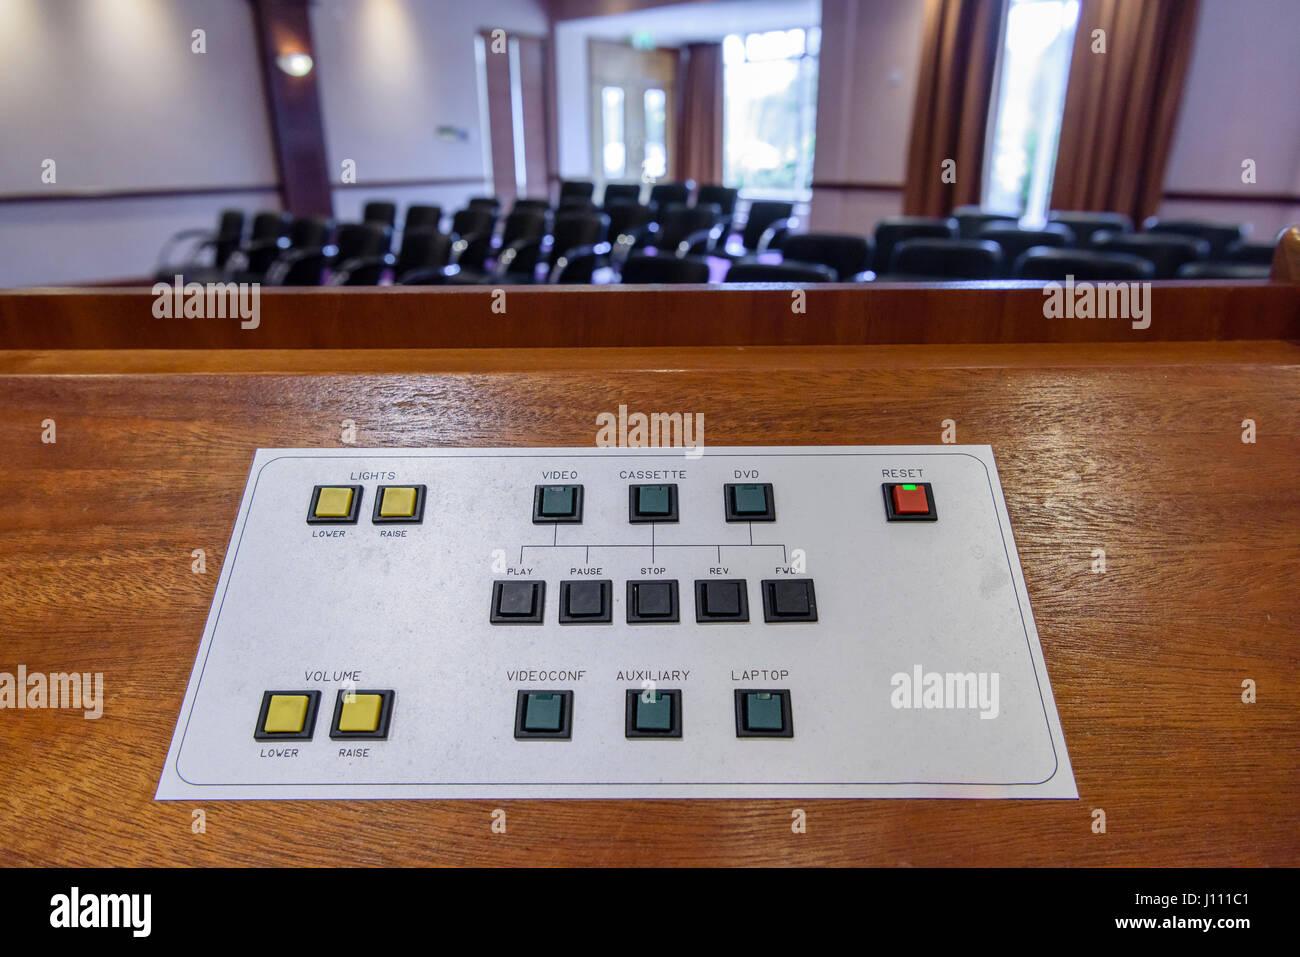 Audio Visual controls on the podium in a hotel conference room. Stock Photo